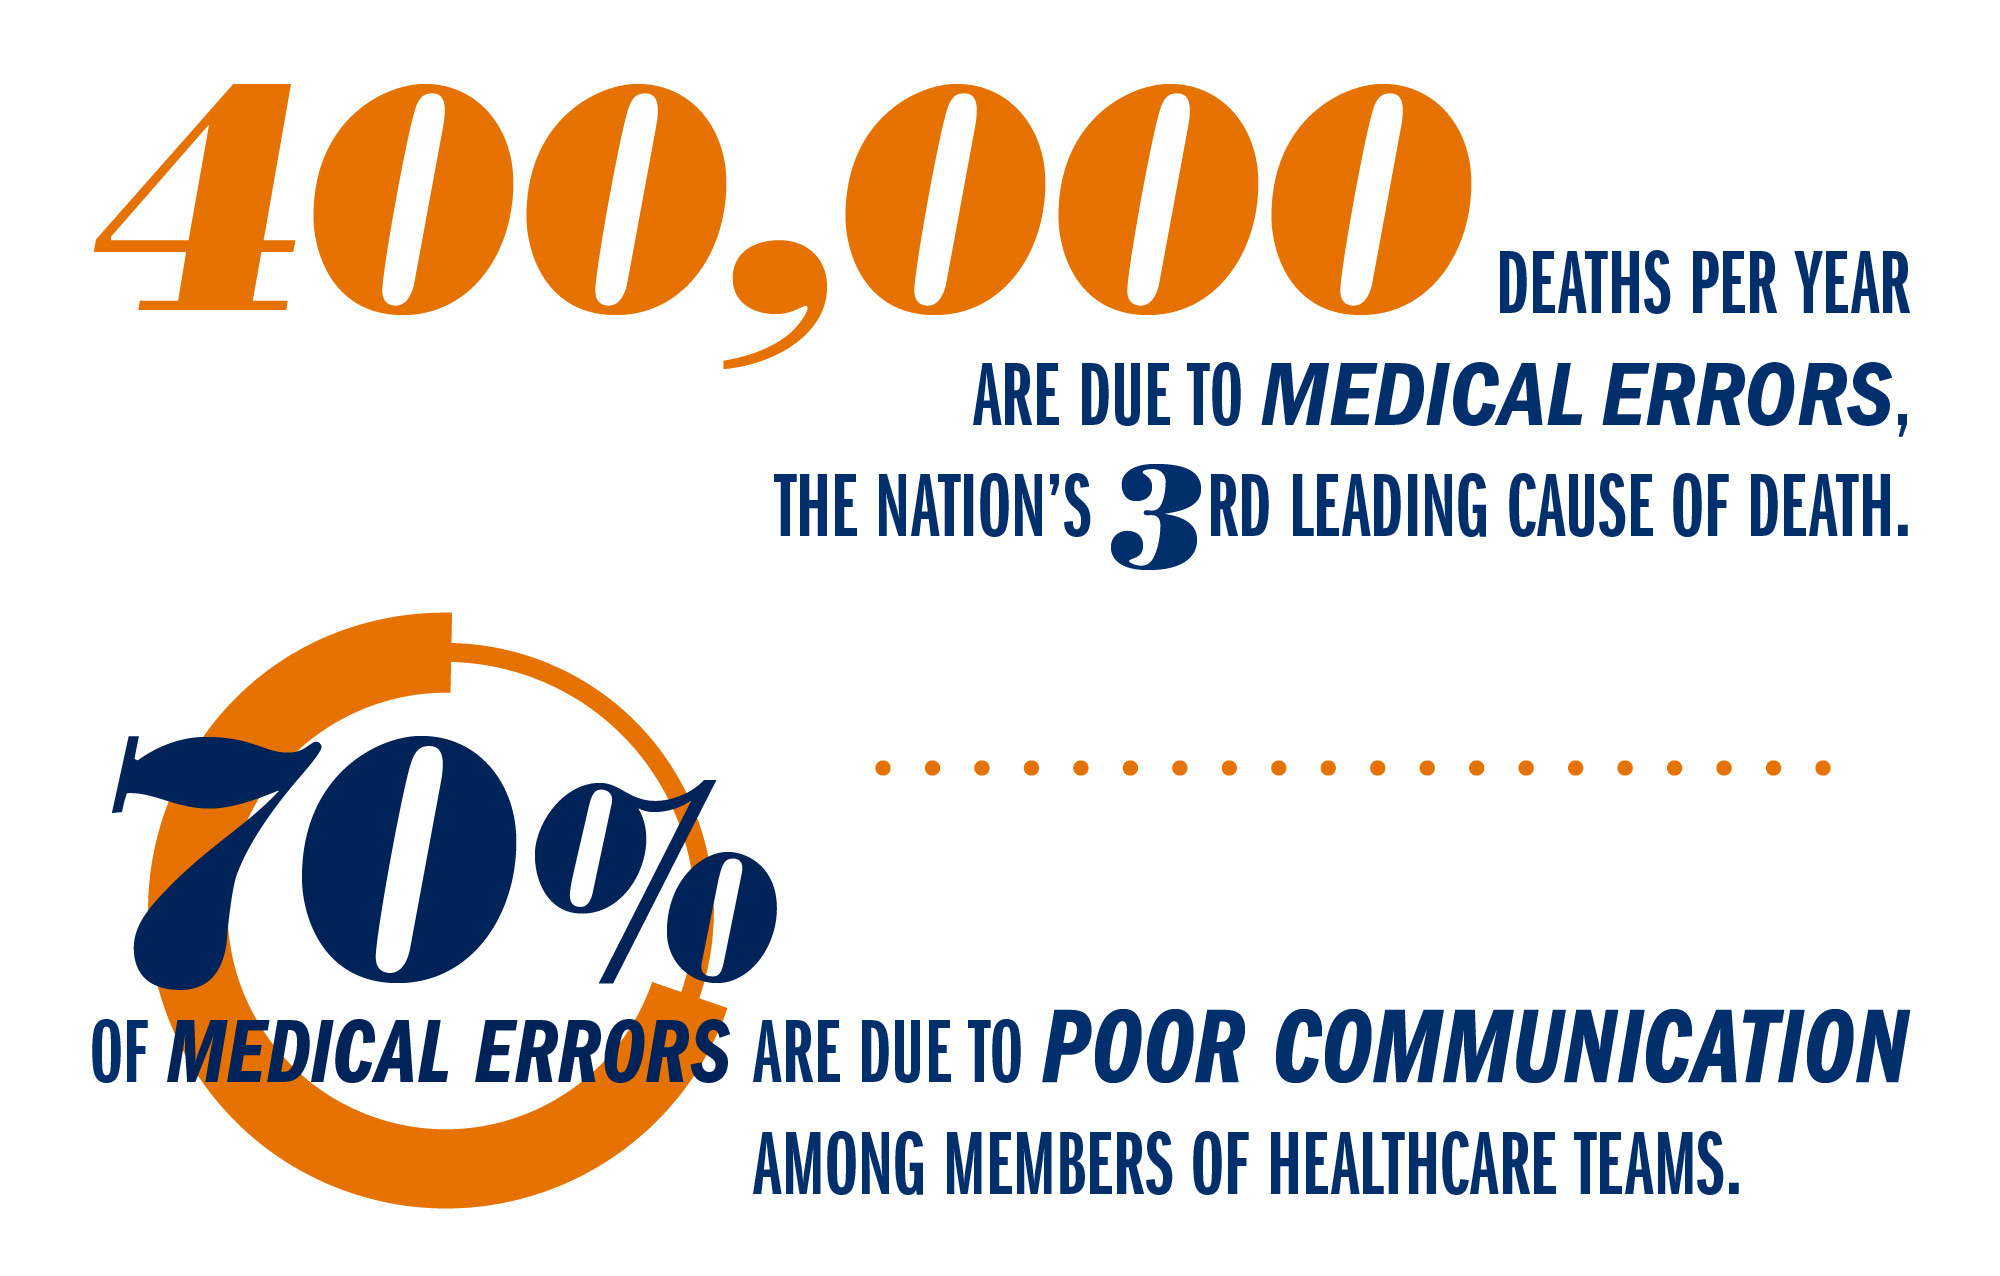 Text reads: 400,000 deaths per year are due to medical errors, the nations third leading cause of death.  70% of medical errors are due to poor communication among members of healthcare teams